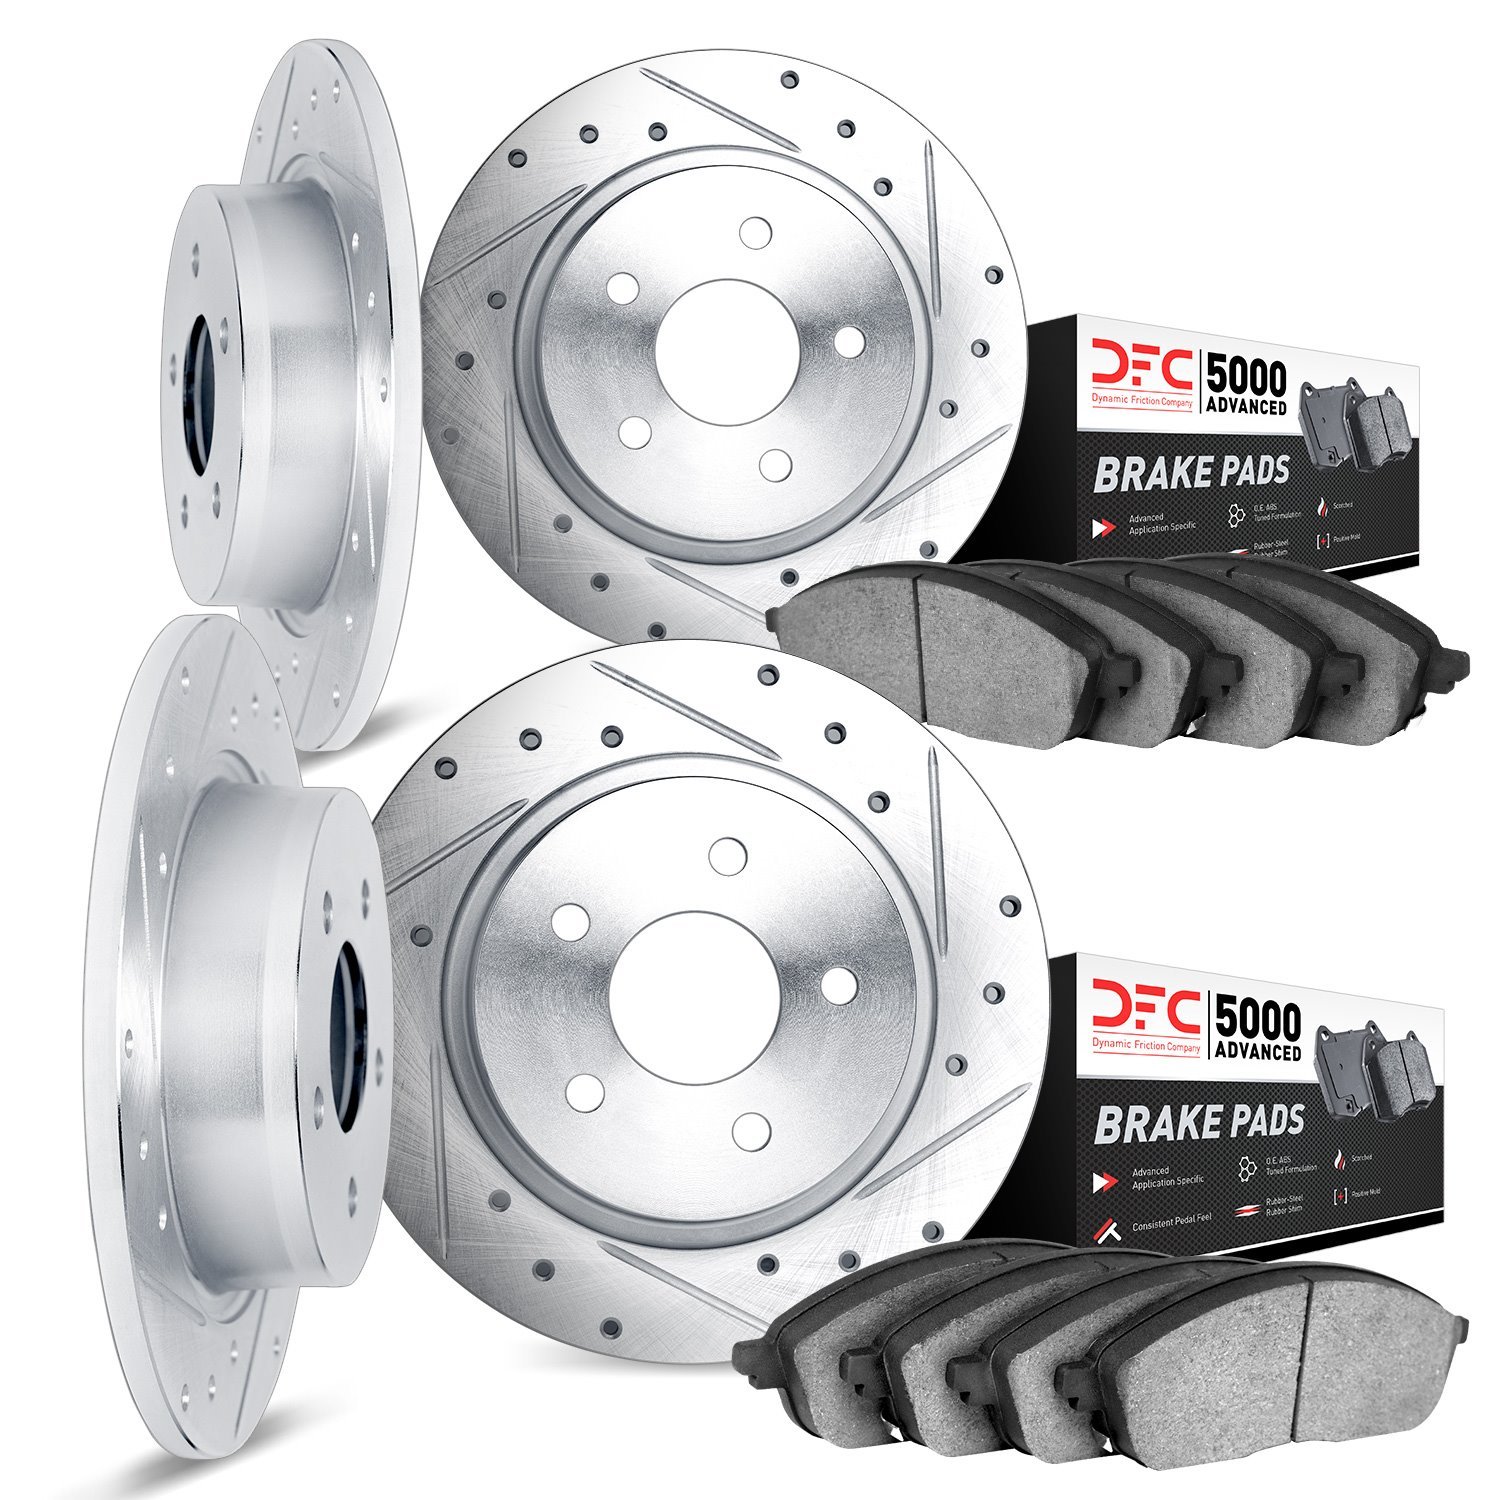 7504-52003 Drilled/Slotted Brake Rotors w/5000 Advanced Brake Pads Kit [Silver], 1984-1987 GM, Position: Front and Rear